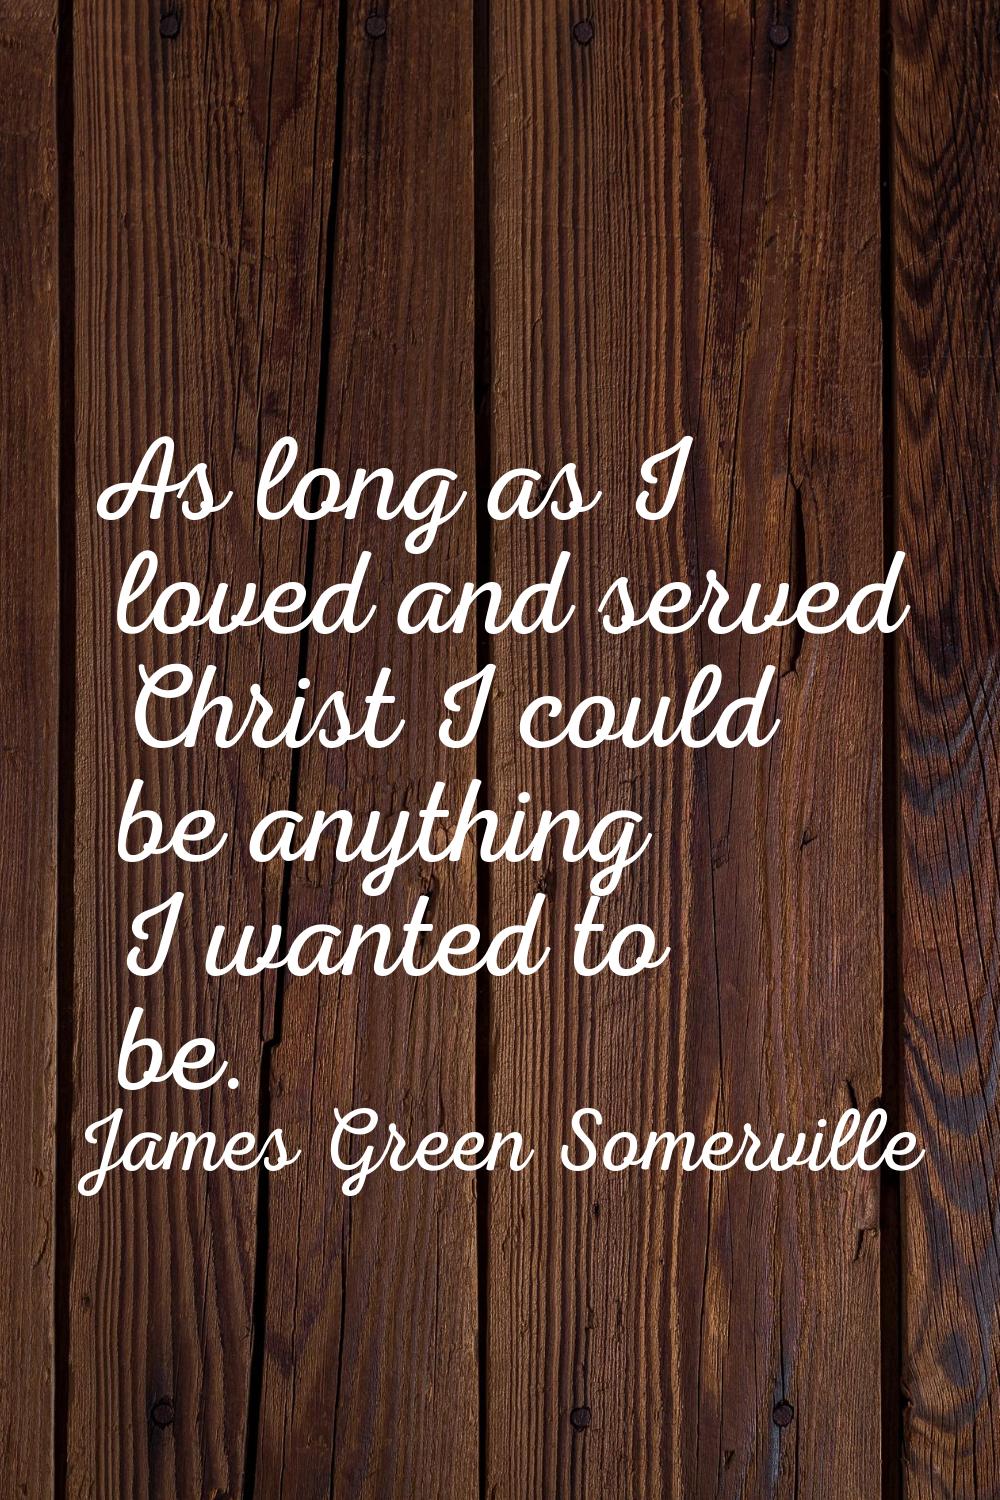 As long as I loved and served Christ I could be anything I wanted to be.